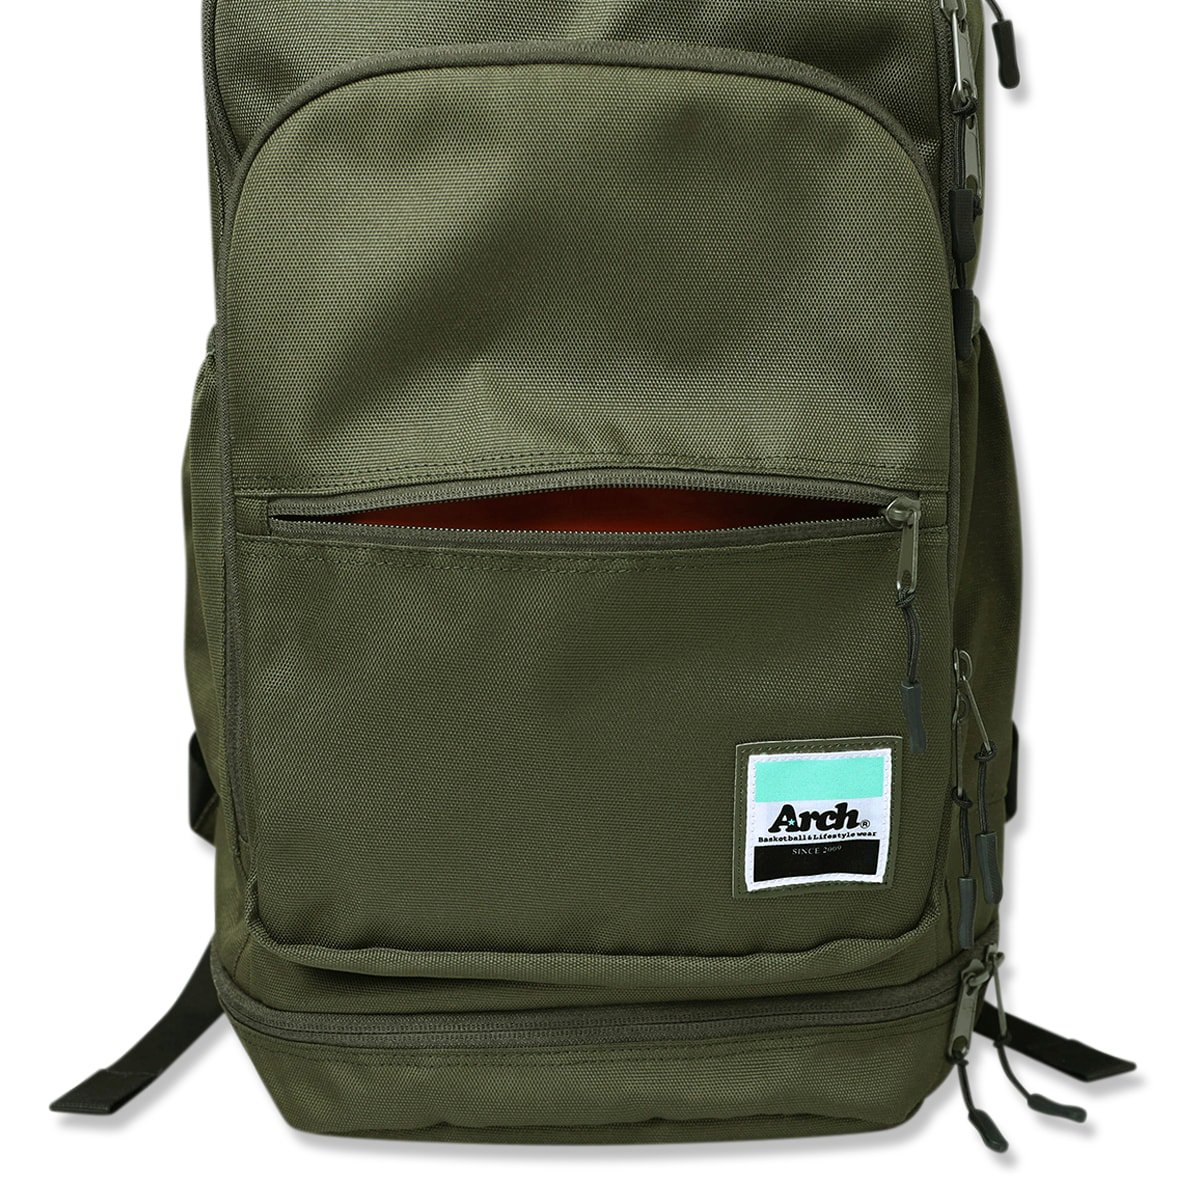 ARCH アーチ Arch workout backpack - リュック/バックパック